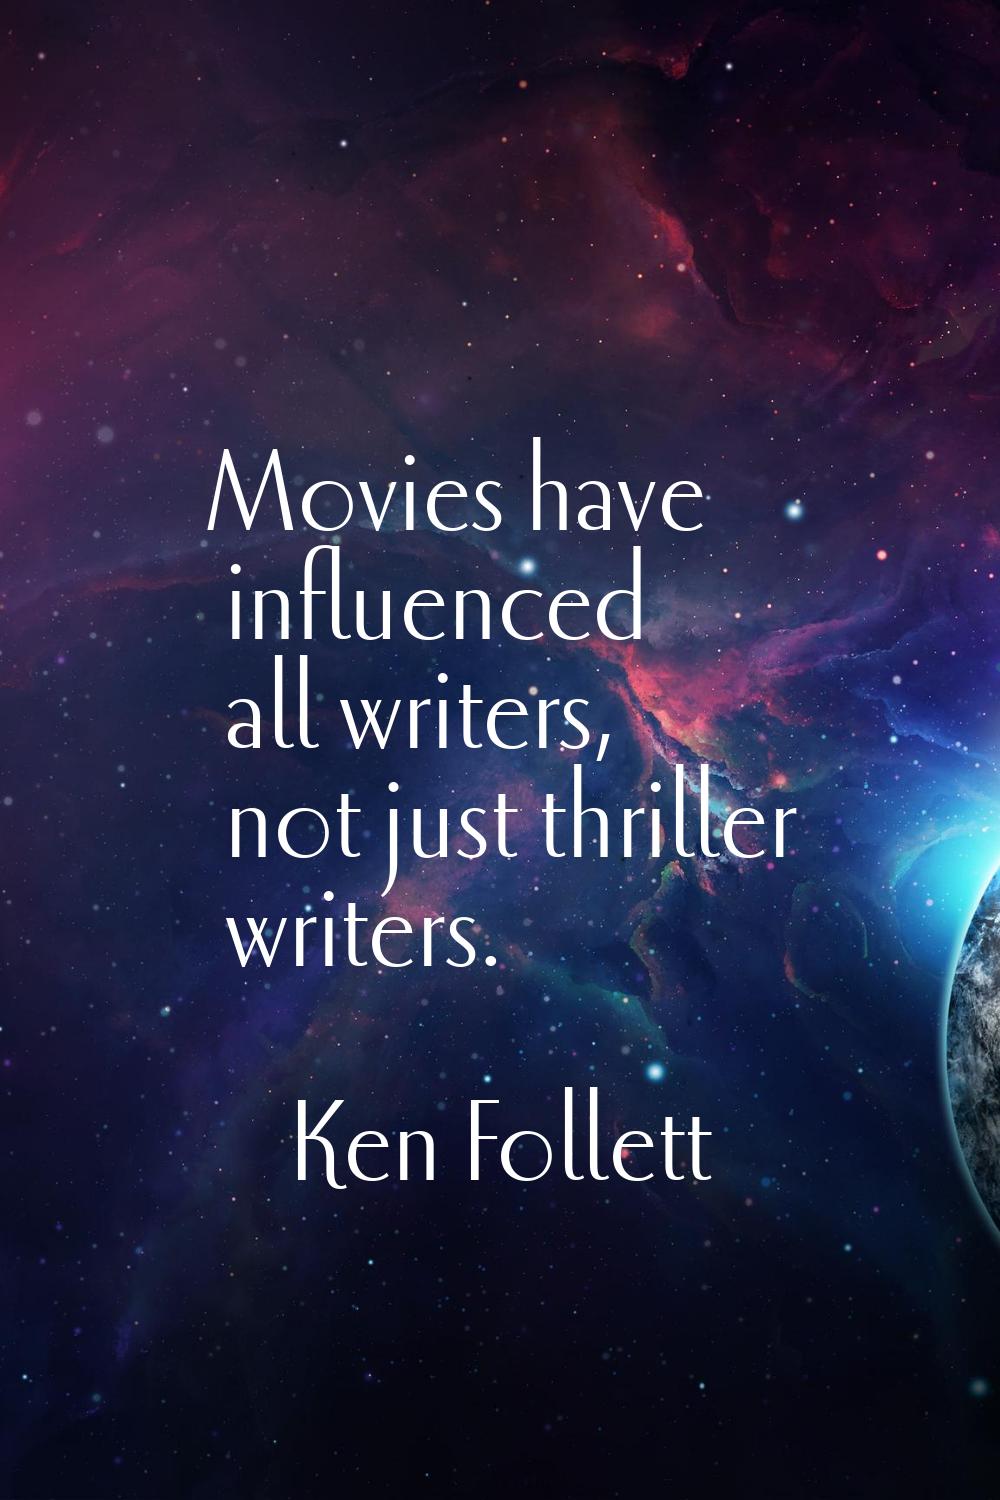 Movies have influenced all writers, not just thriller writers.